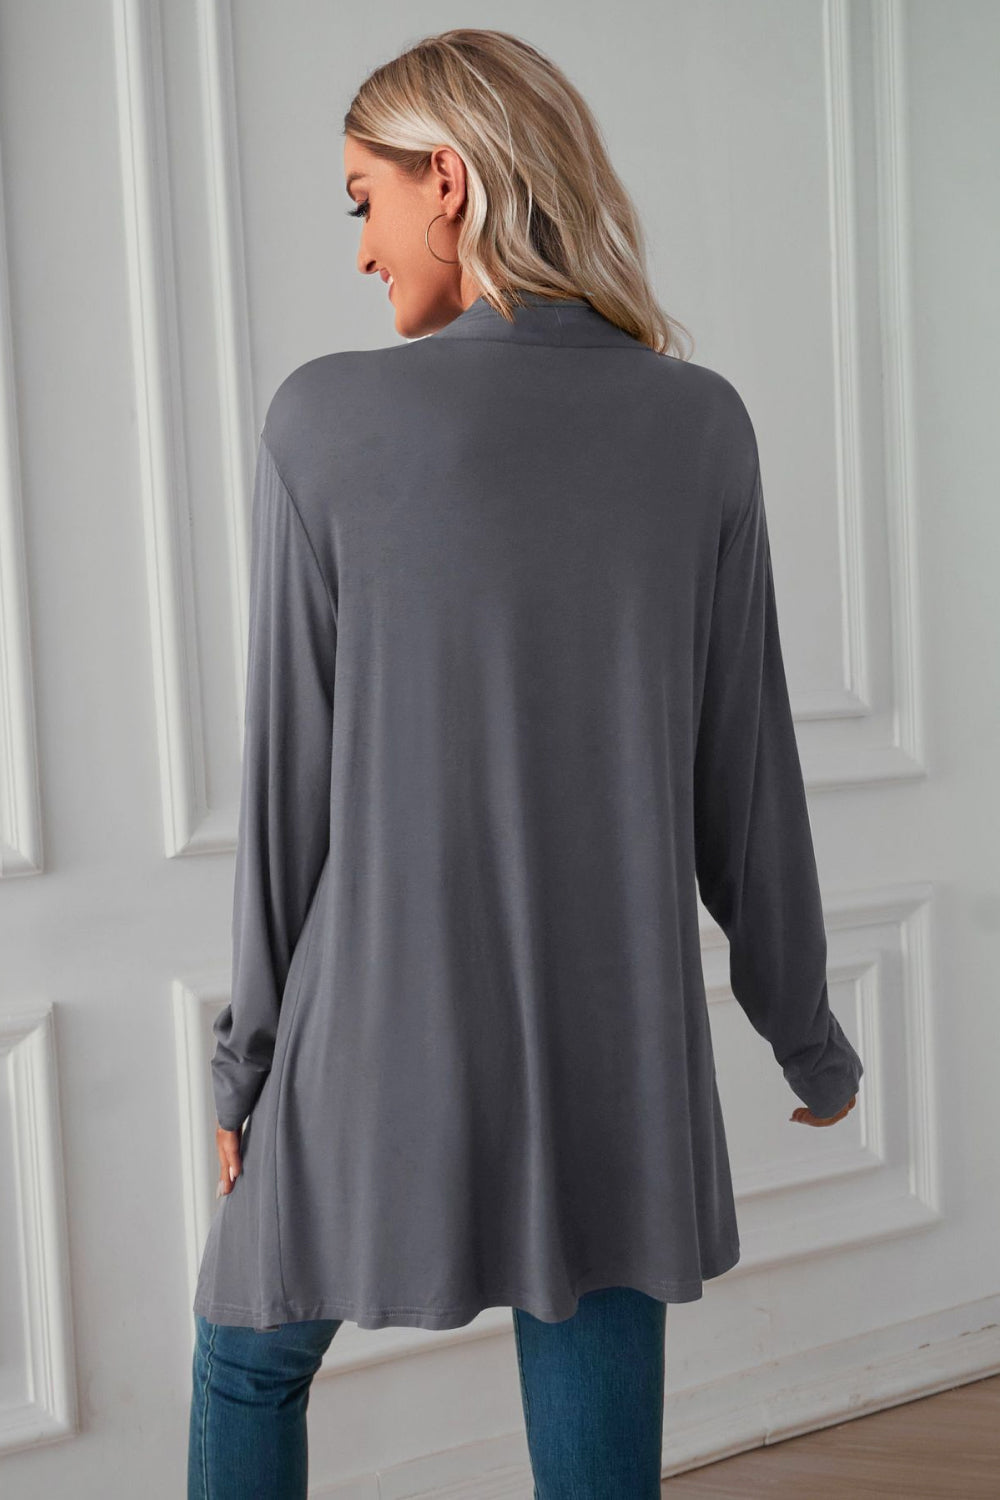 Open Front Long Sleeve Cardigan - Women’s Clothing & Accessories - Shirts & Tops - 24 - 2024